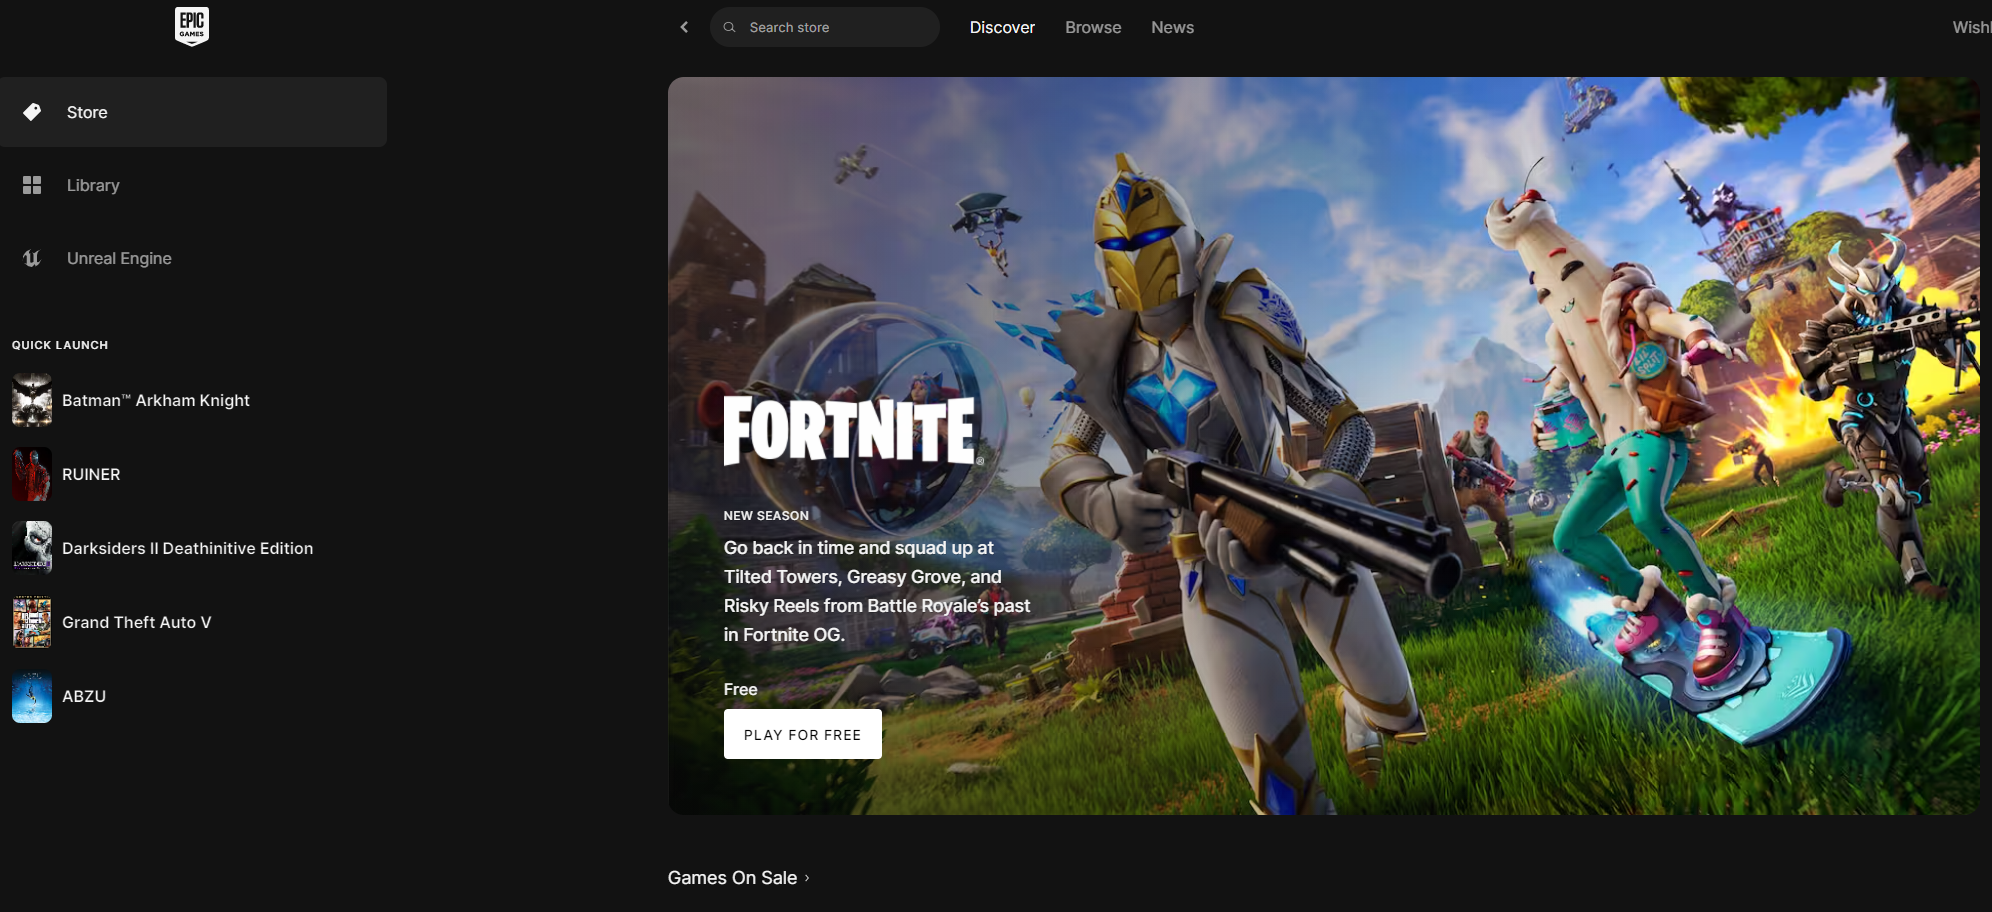 Epic Games just banned some Fortnite accounts, but no one knows